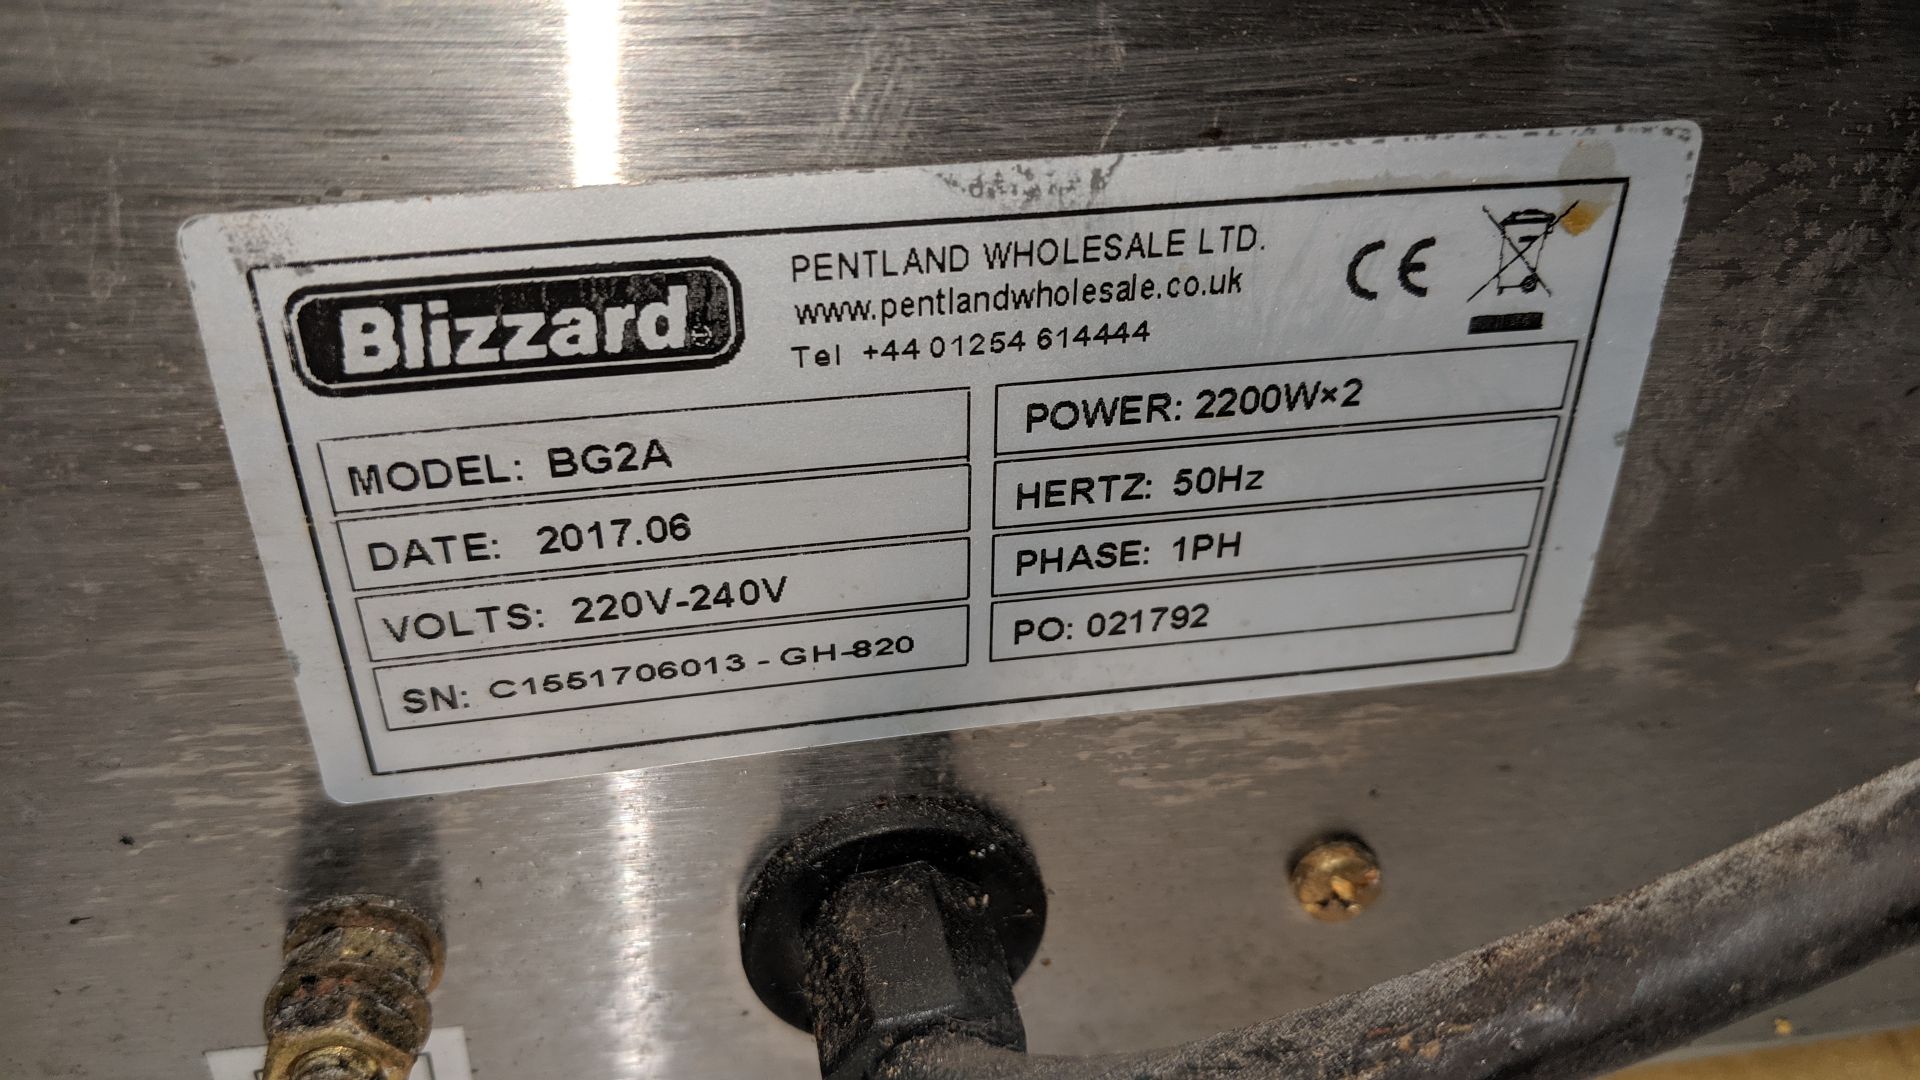 Blizzard benchtop plancha/griddle unit IMPORTANT: Please remember goods successfully bid upon must - Image 4 of 4